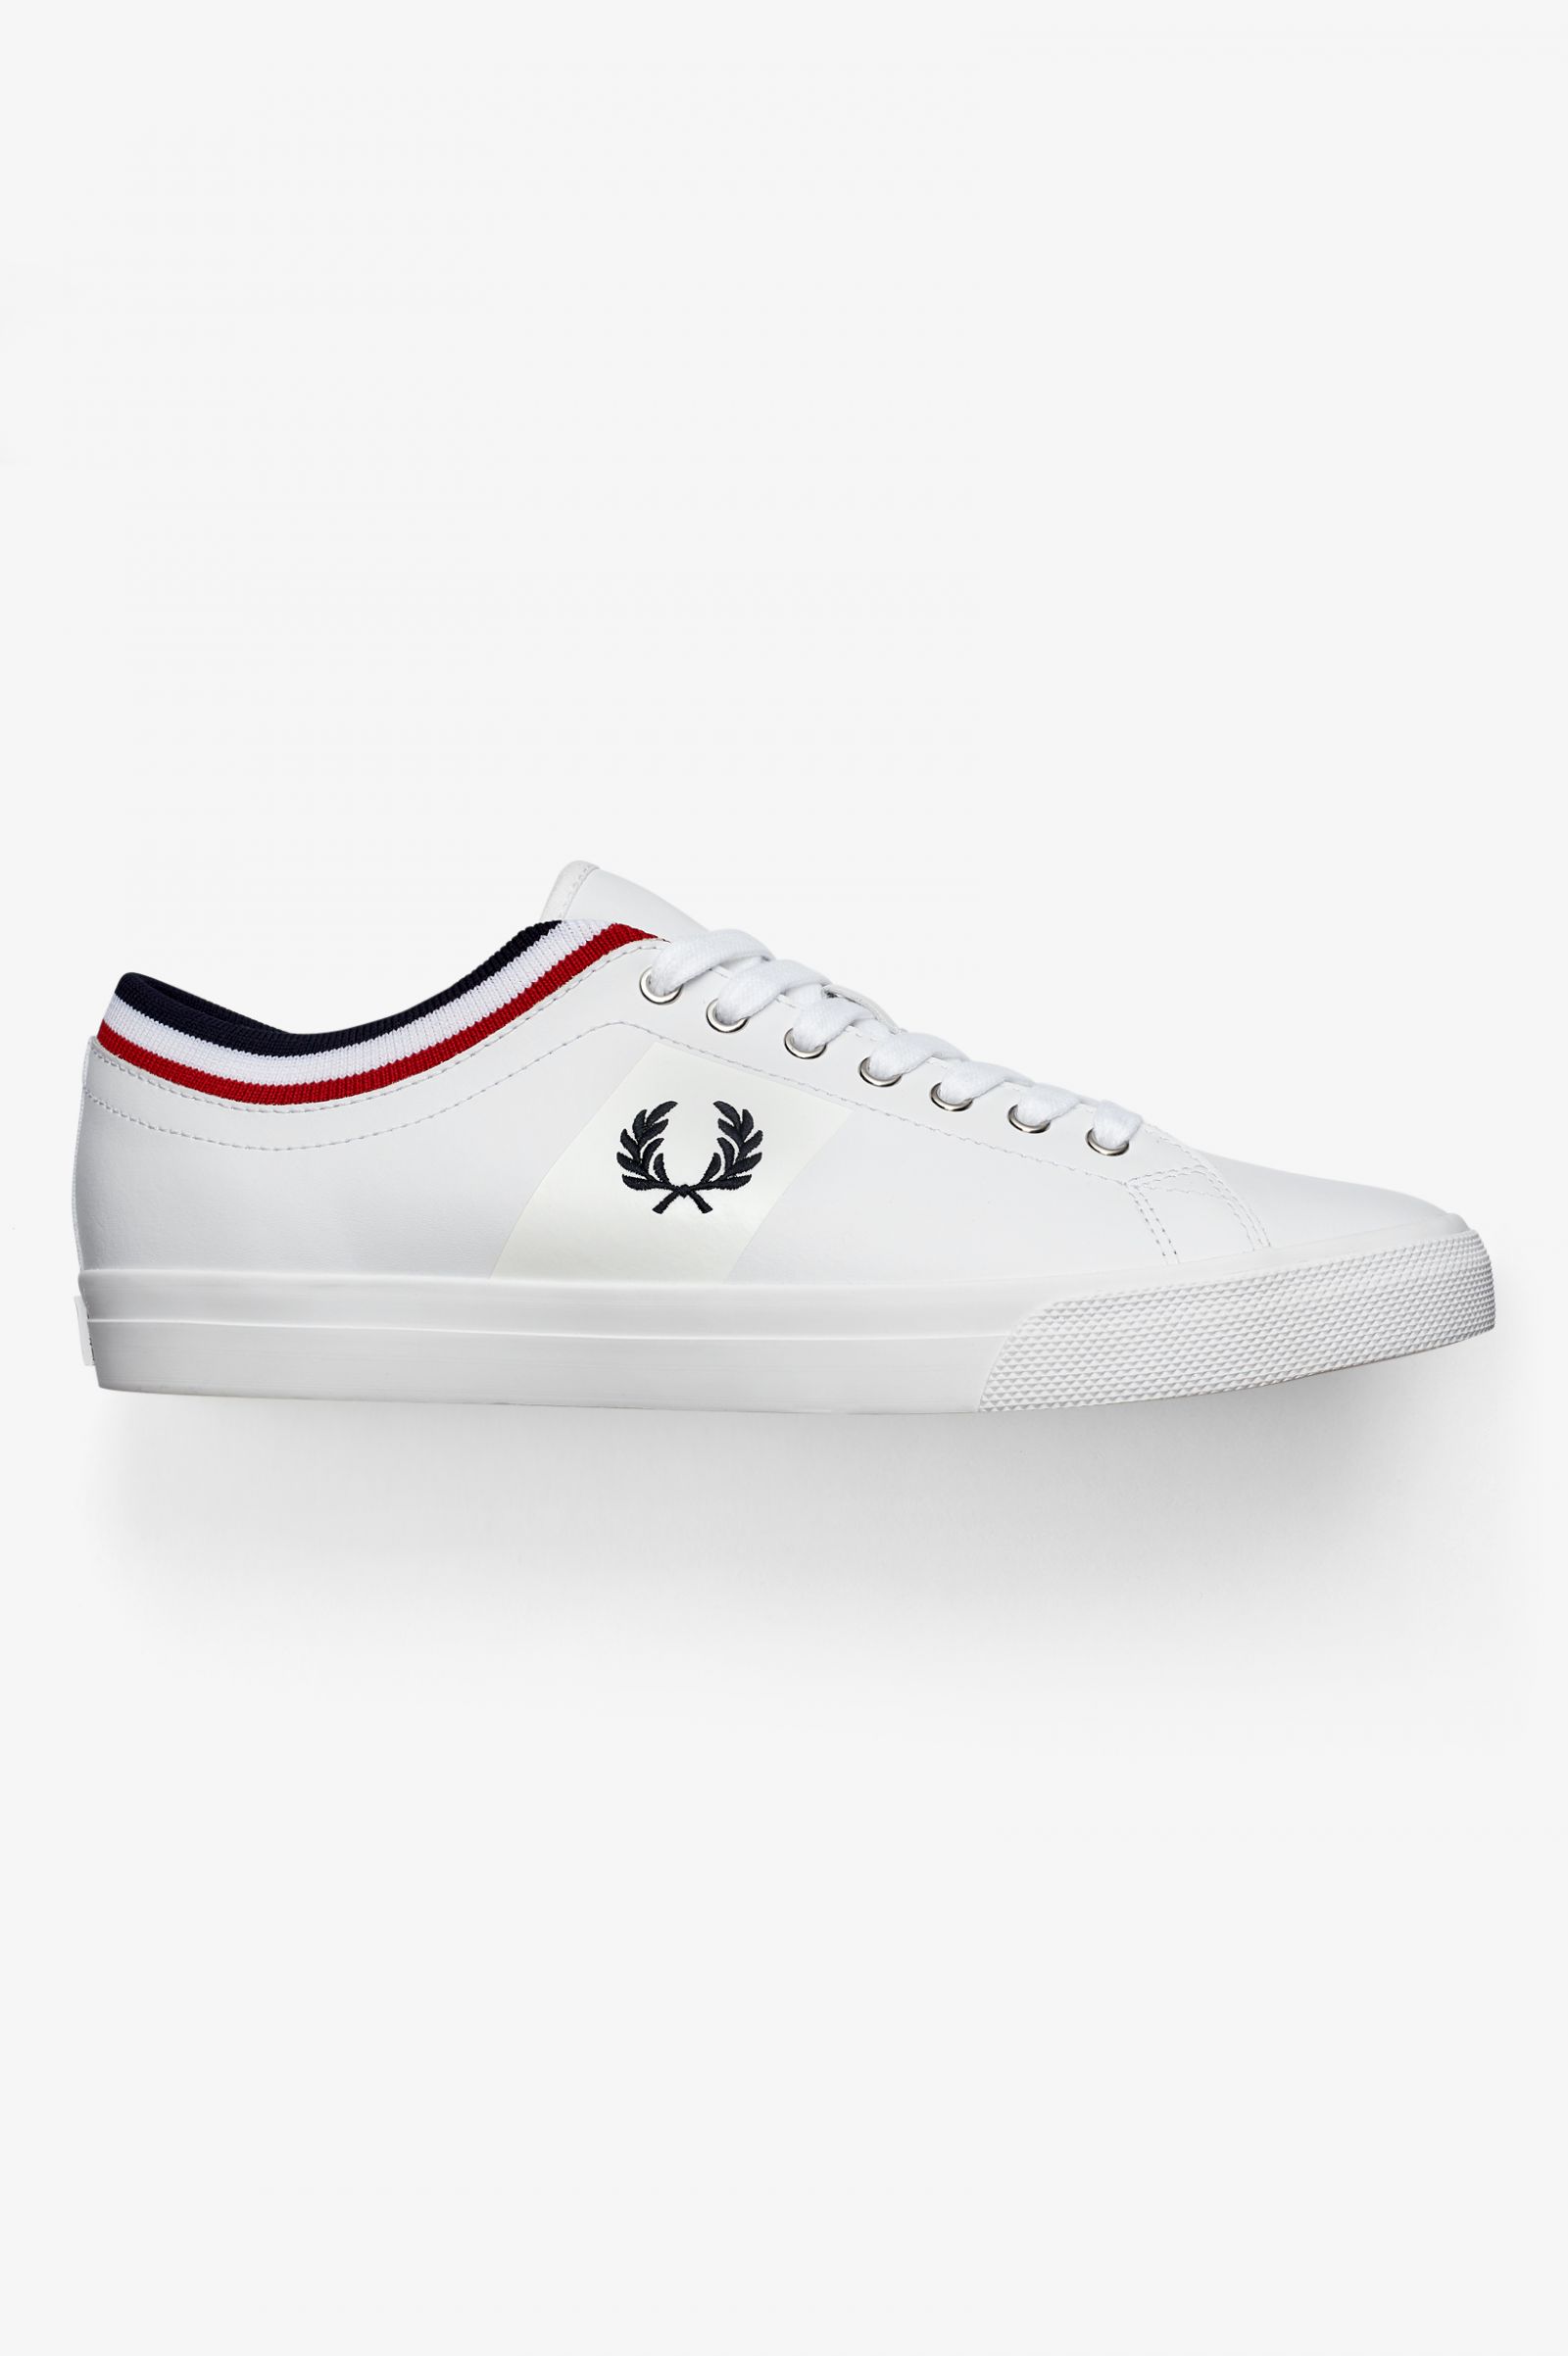 fred perry all white shoes